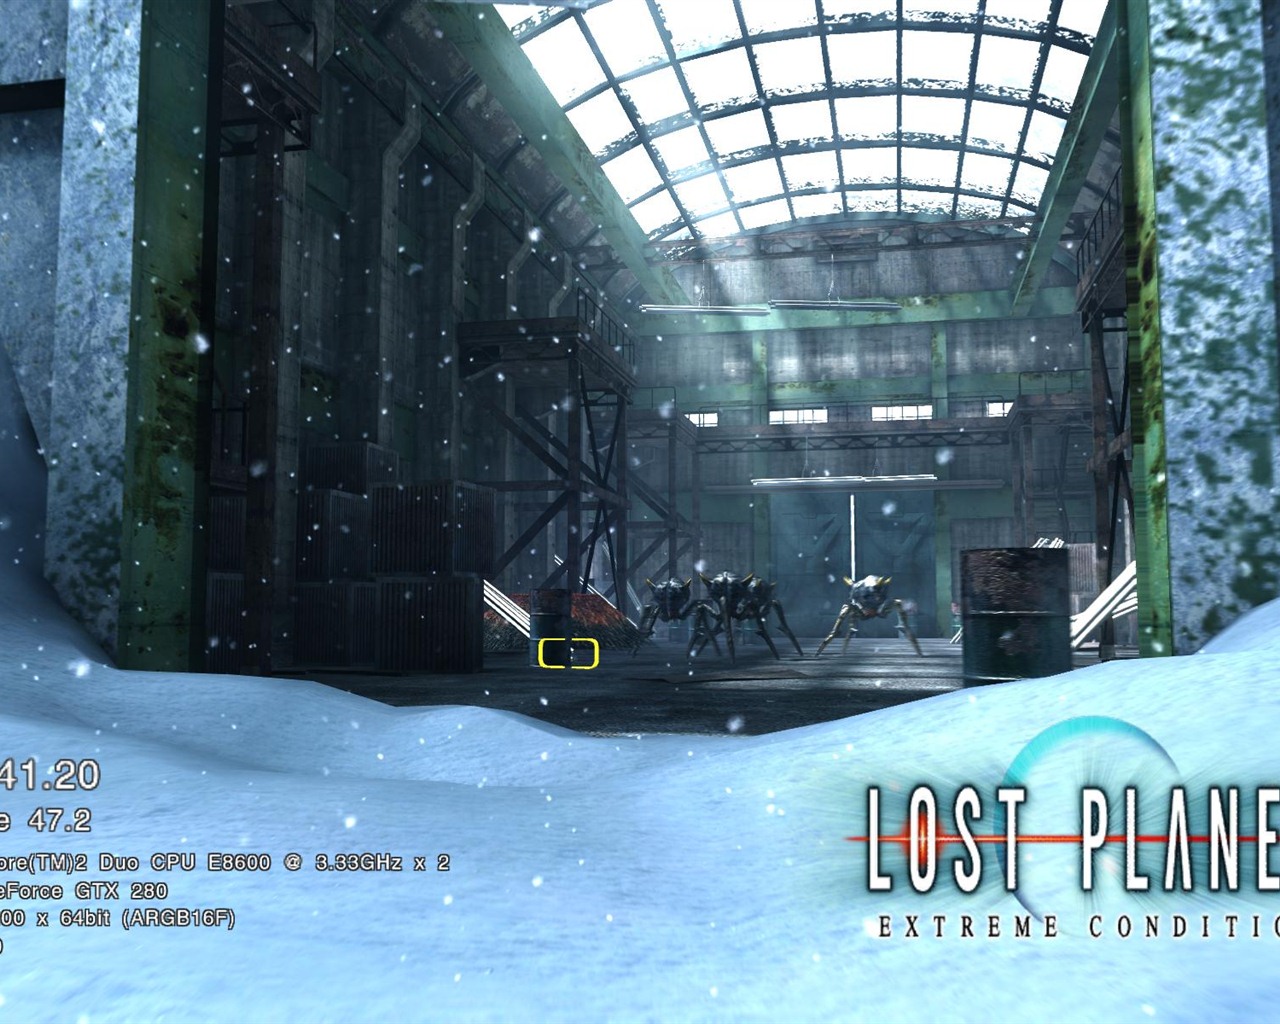 Lost Planet: Extreme Condition HD tapety na plochu #12 - 1280x1024